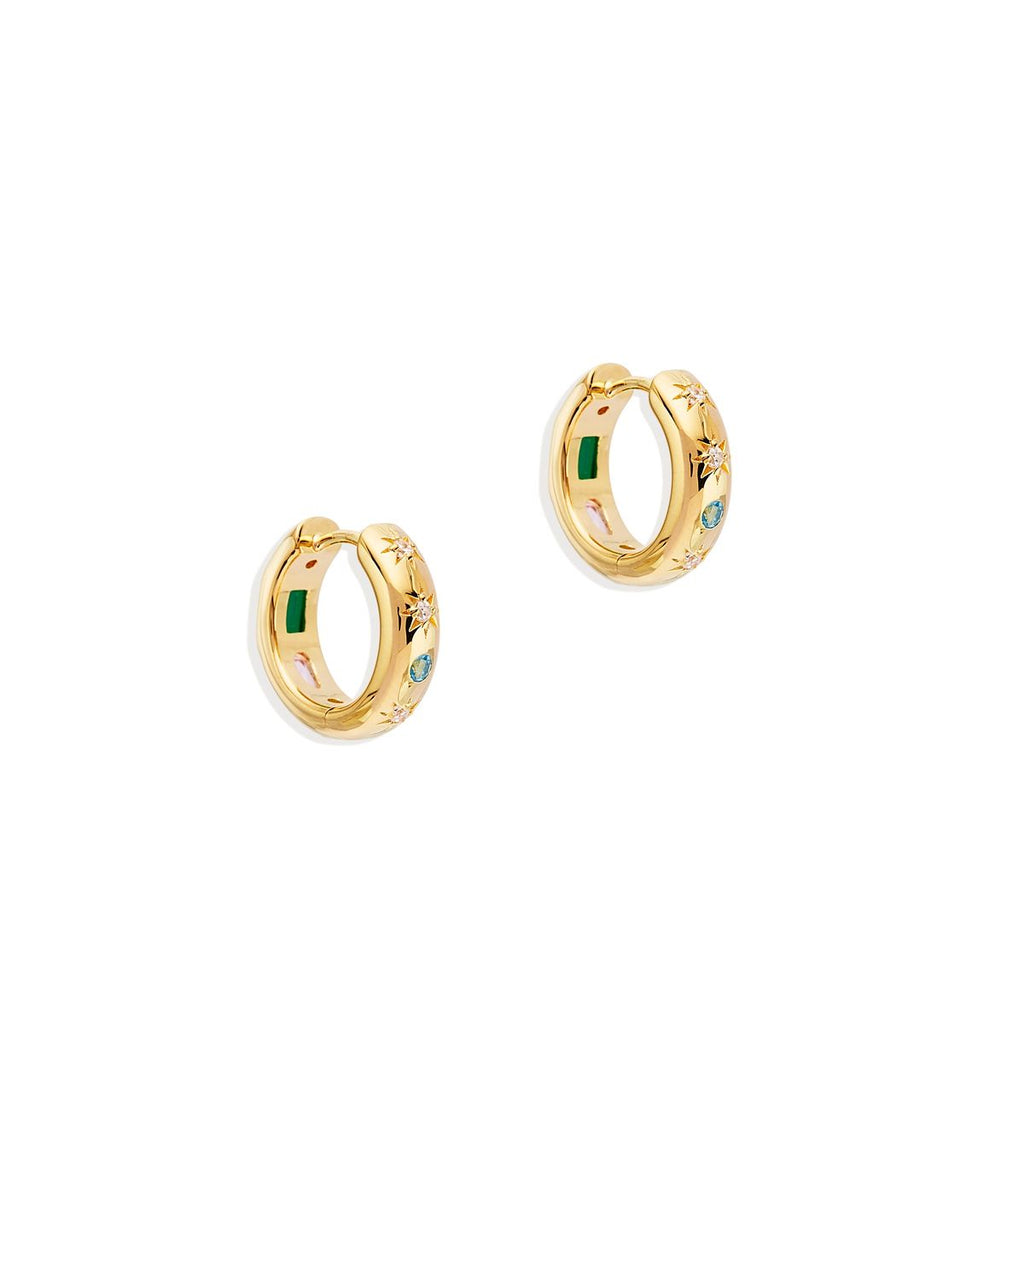 CONNECT TO THE UNIVERSE HOOPS - 18K GOLD VERMEIL - BY CHARLOTTE